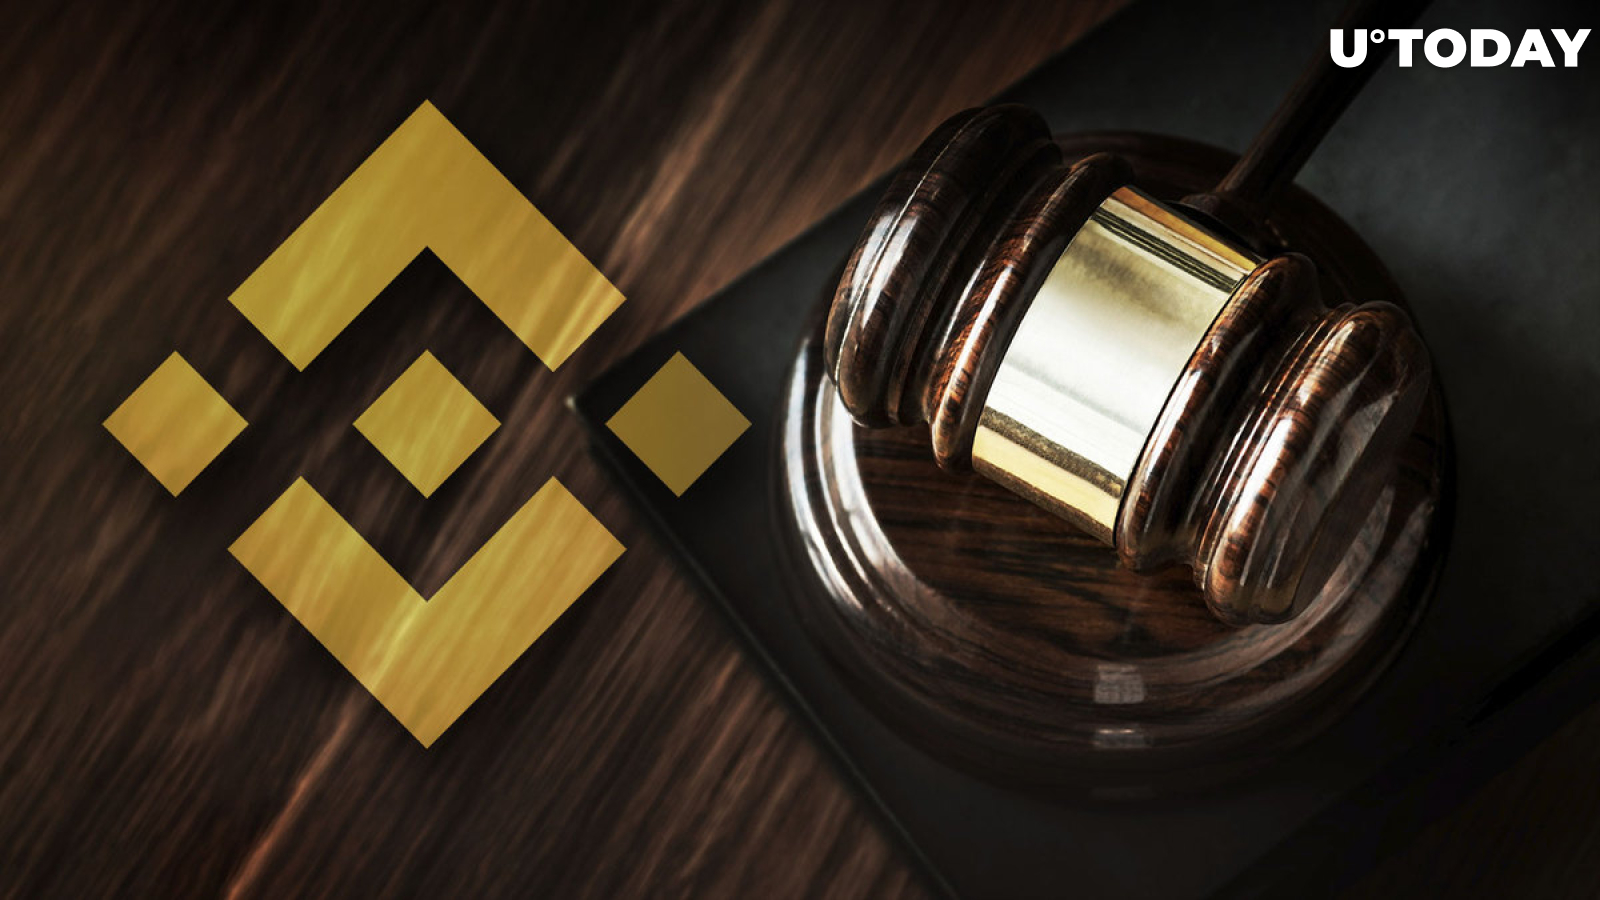 Binance Receives Important Validation in Court Documents